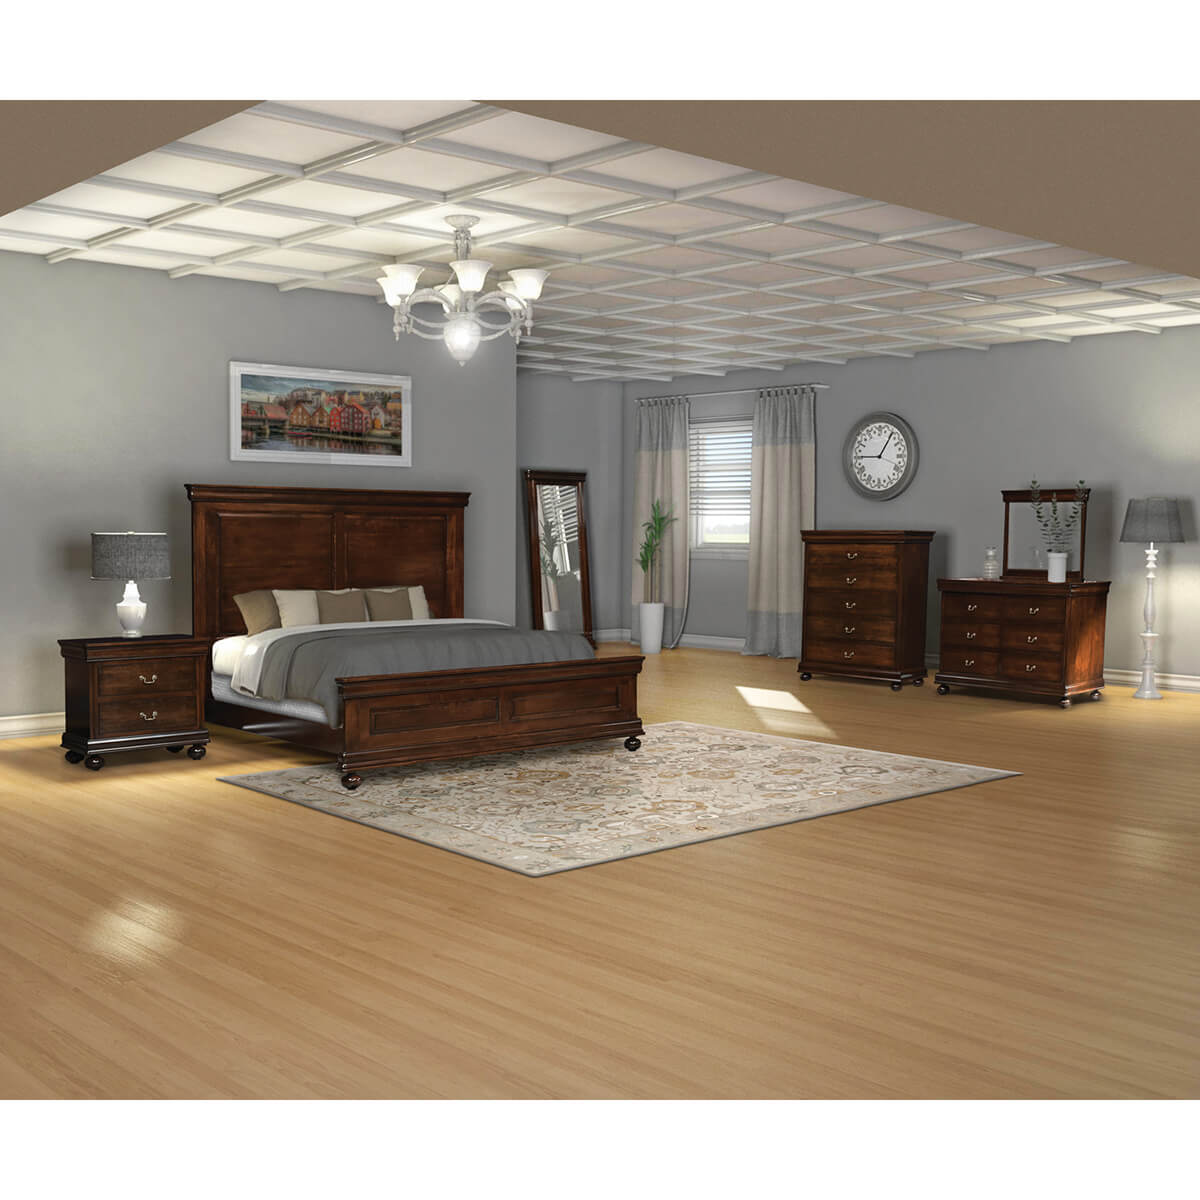 Read more about the article Baystorm Bedroom Collection